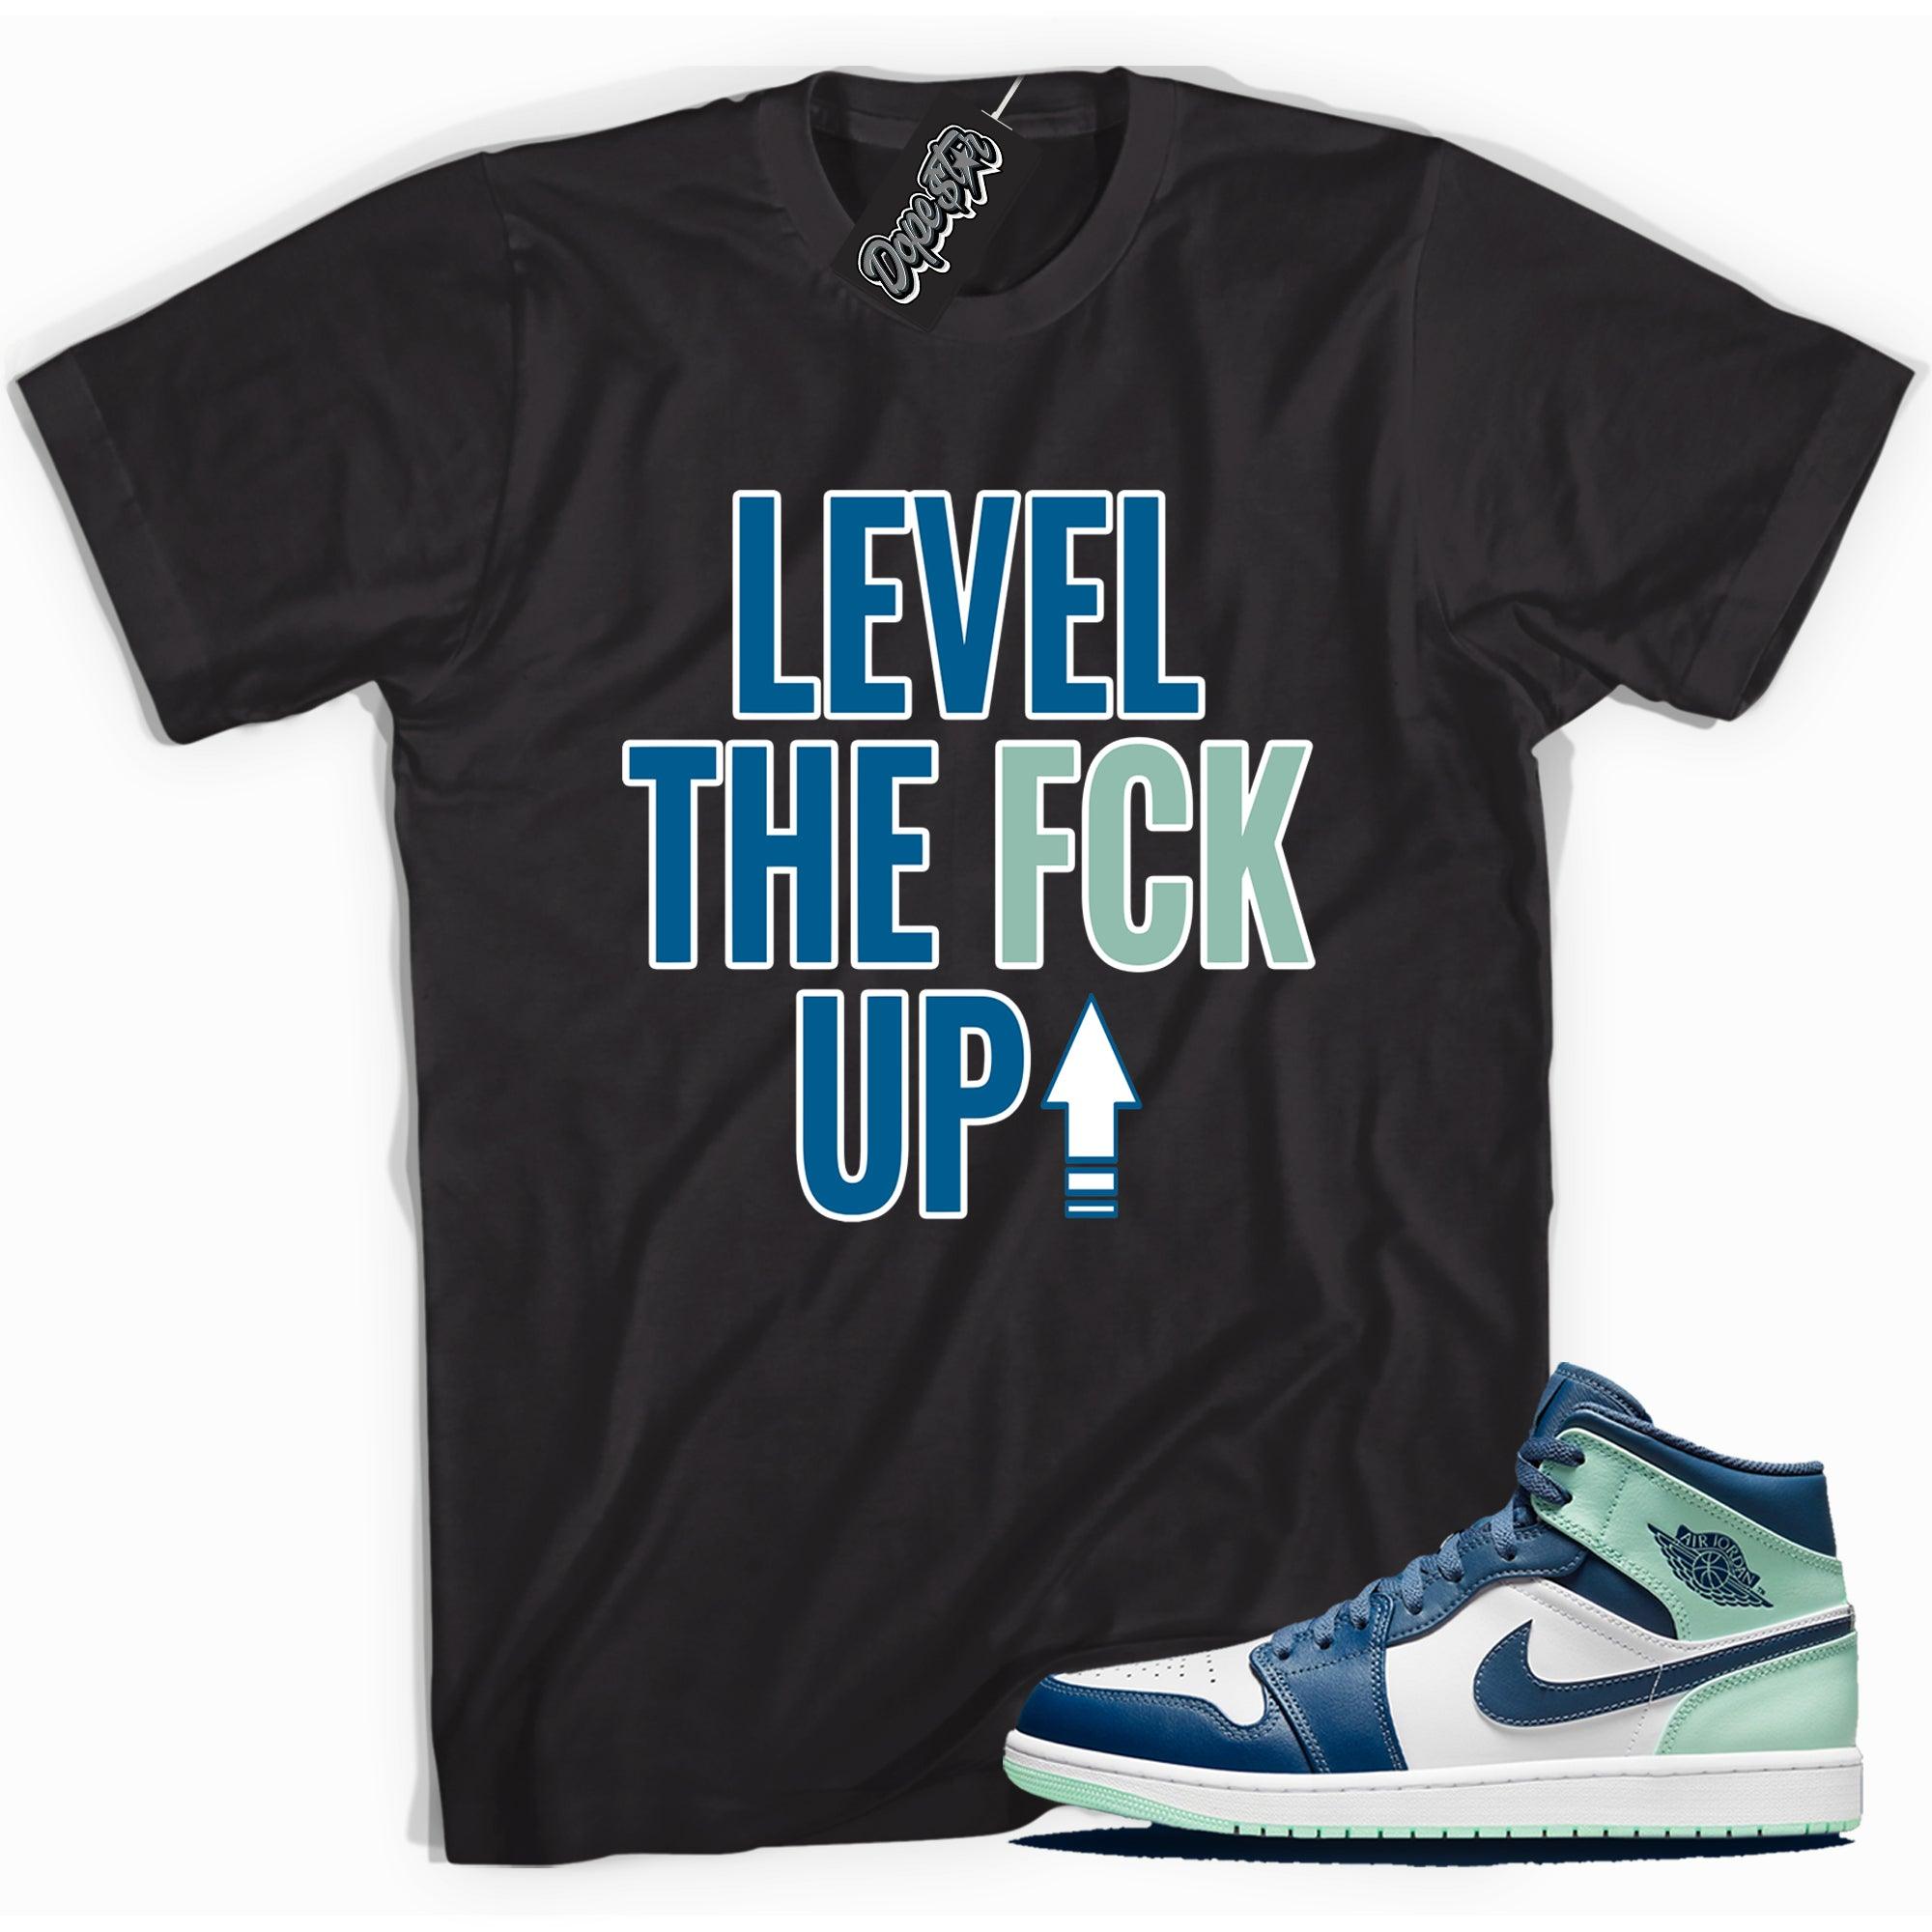 Cool black graphic tee with 'Level Up' print, that perfectly matches Air Jordan 1 Mid Mystic Navy Mint Foam sneakers.